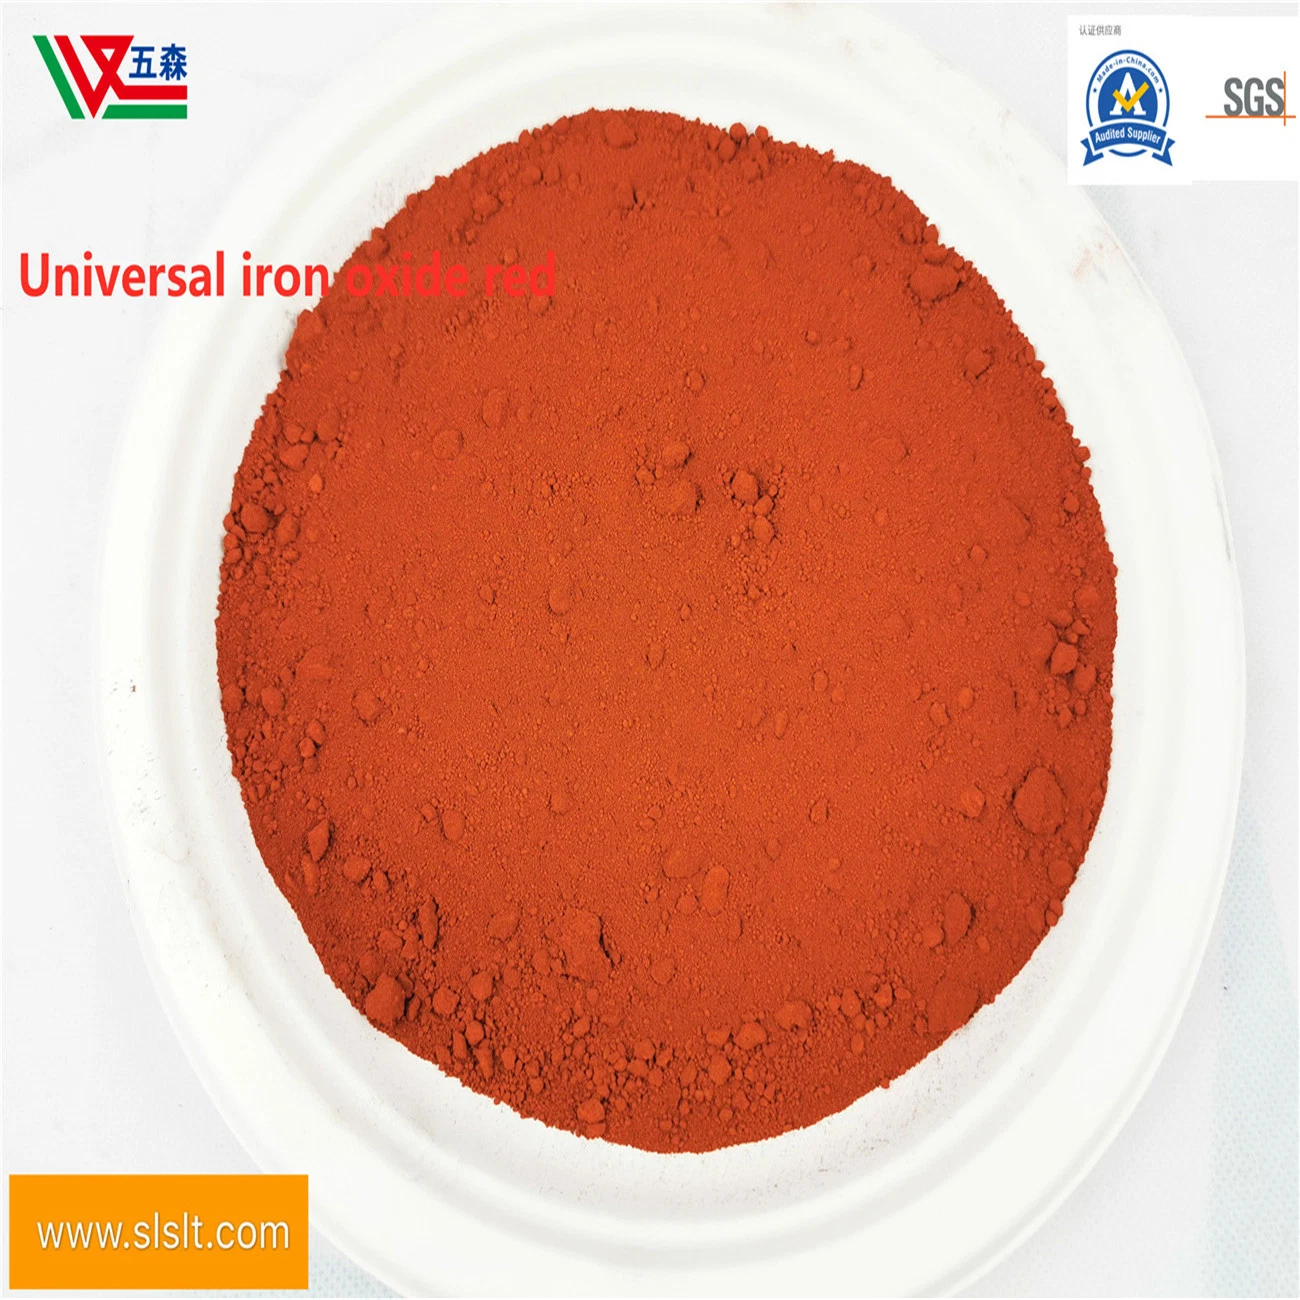 Sale of Concrete Pigment Iron Oxide Red Powder Special Iron Red Pigment for Permeable Pavement Asphalt